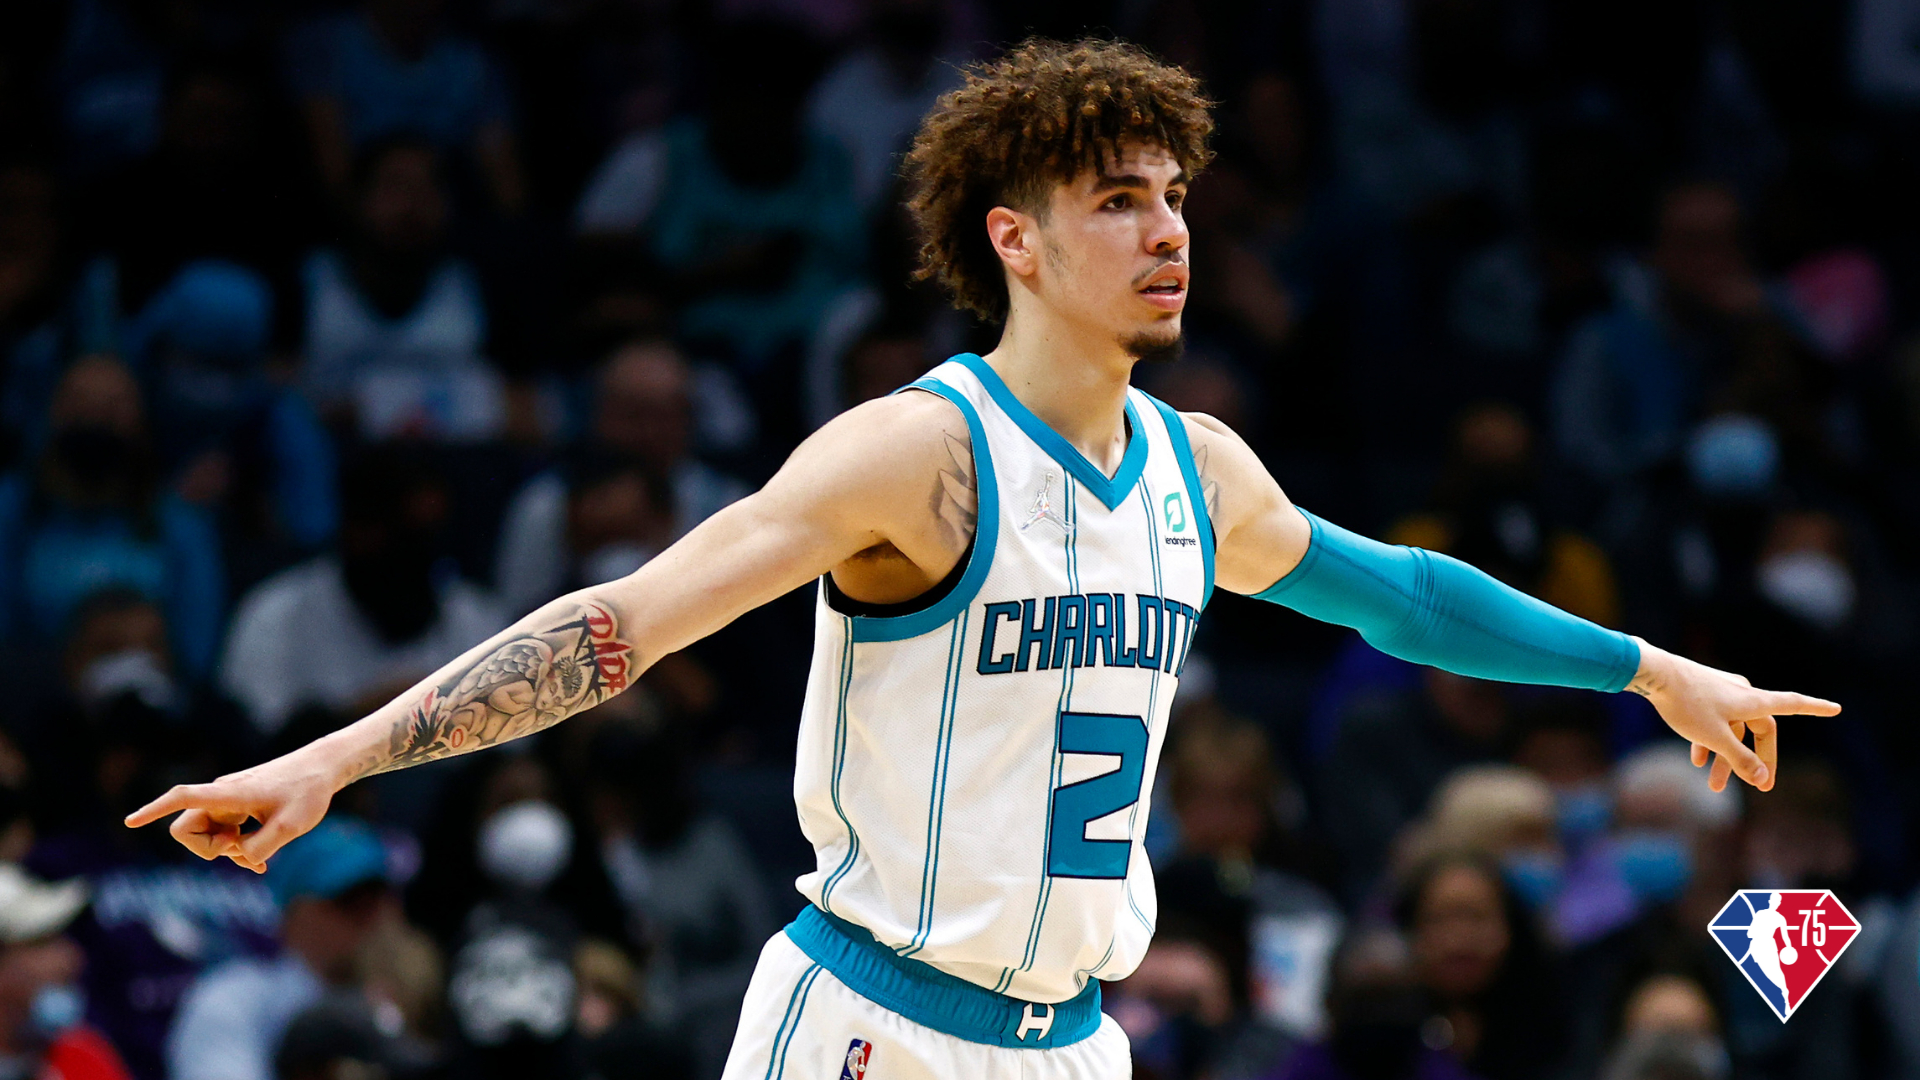 lamelo-ball_synssoa19ad17h2p9wc39j7o.png